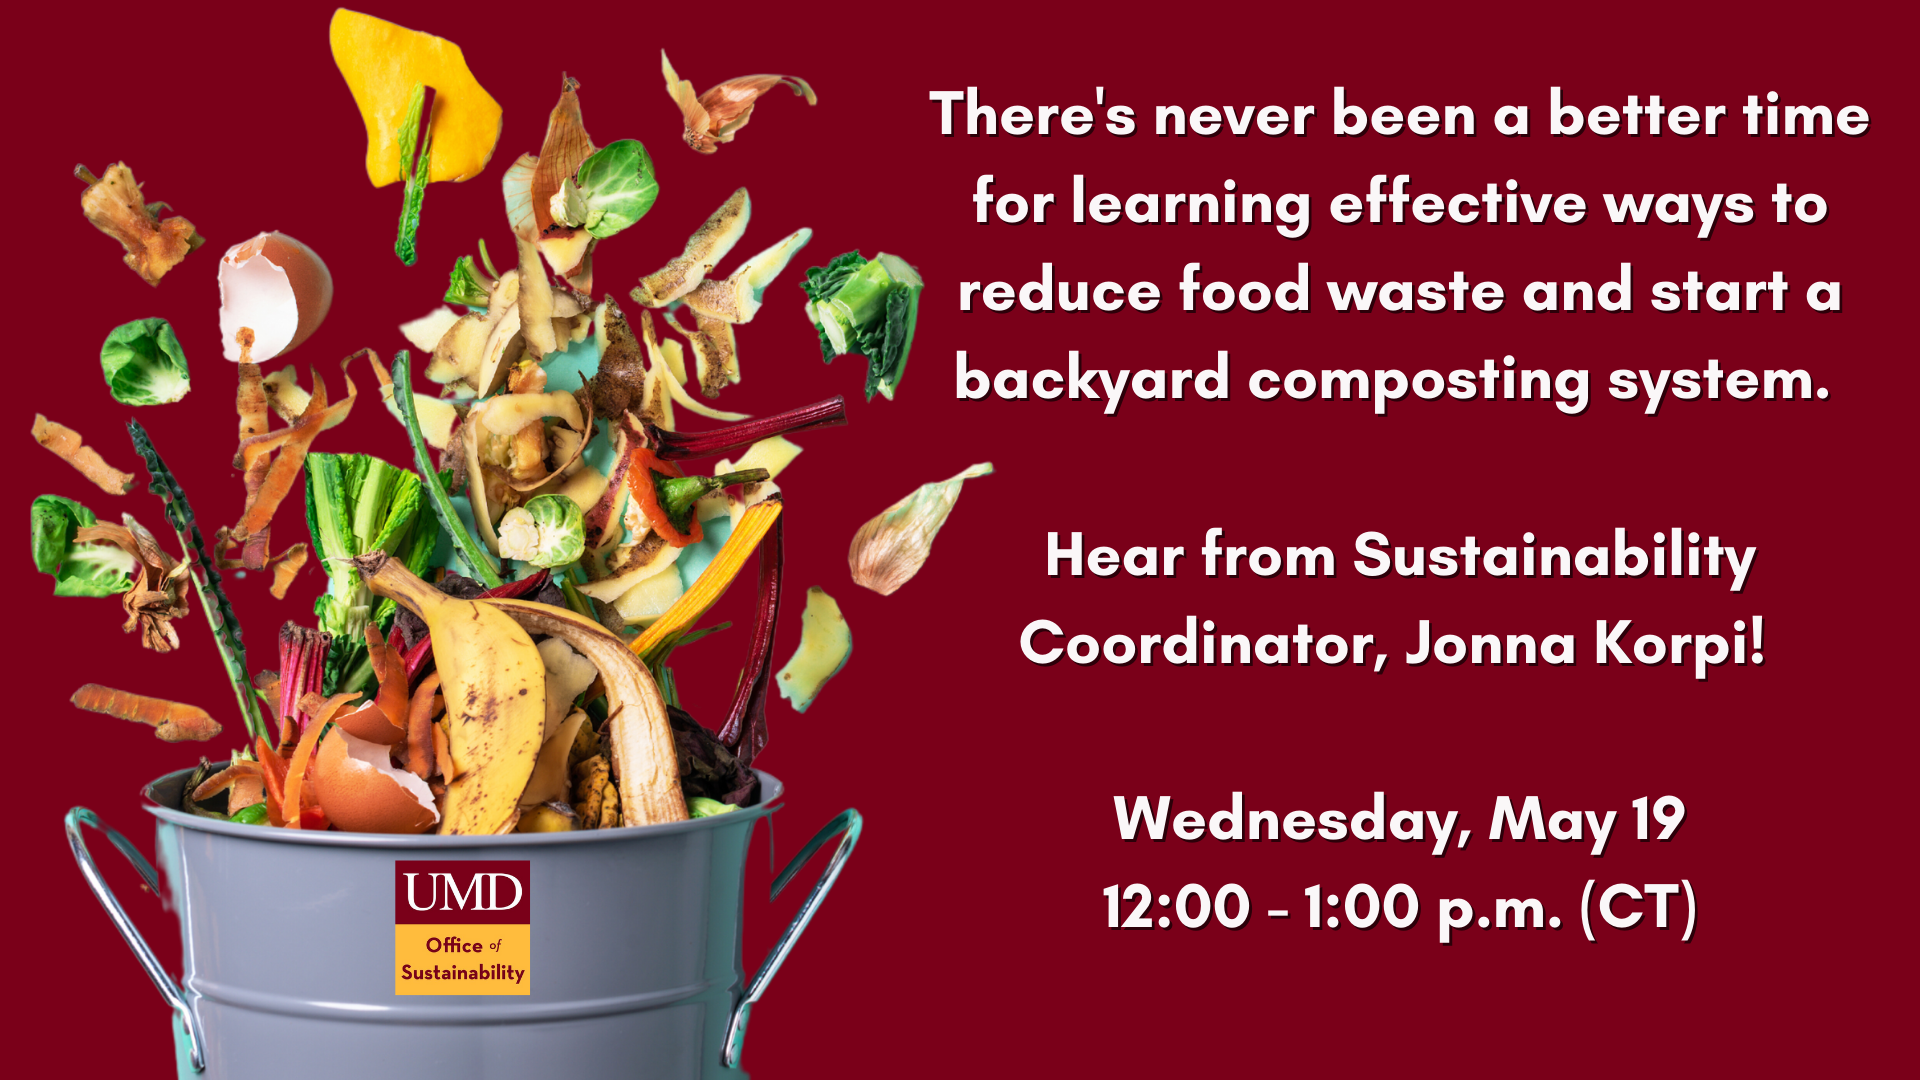 There's never been a better time for learning effective ways to reduce food waste and start a backyard composting system.   Hear from Sustainability Coordinator, Jonna Korpi!    Wednesday, May 19 12:00 - 1:00 p.m. (CT)